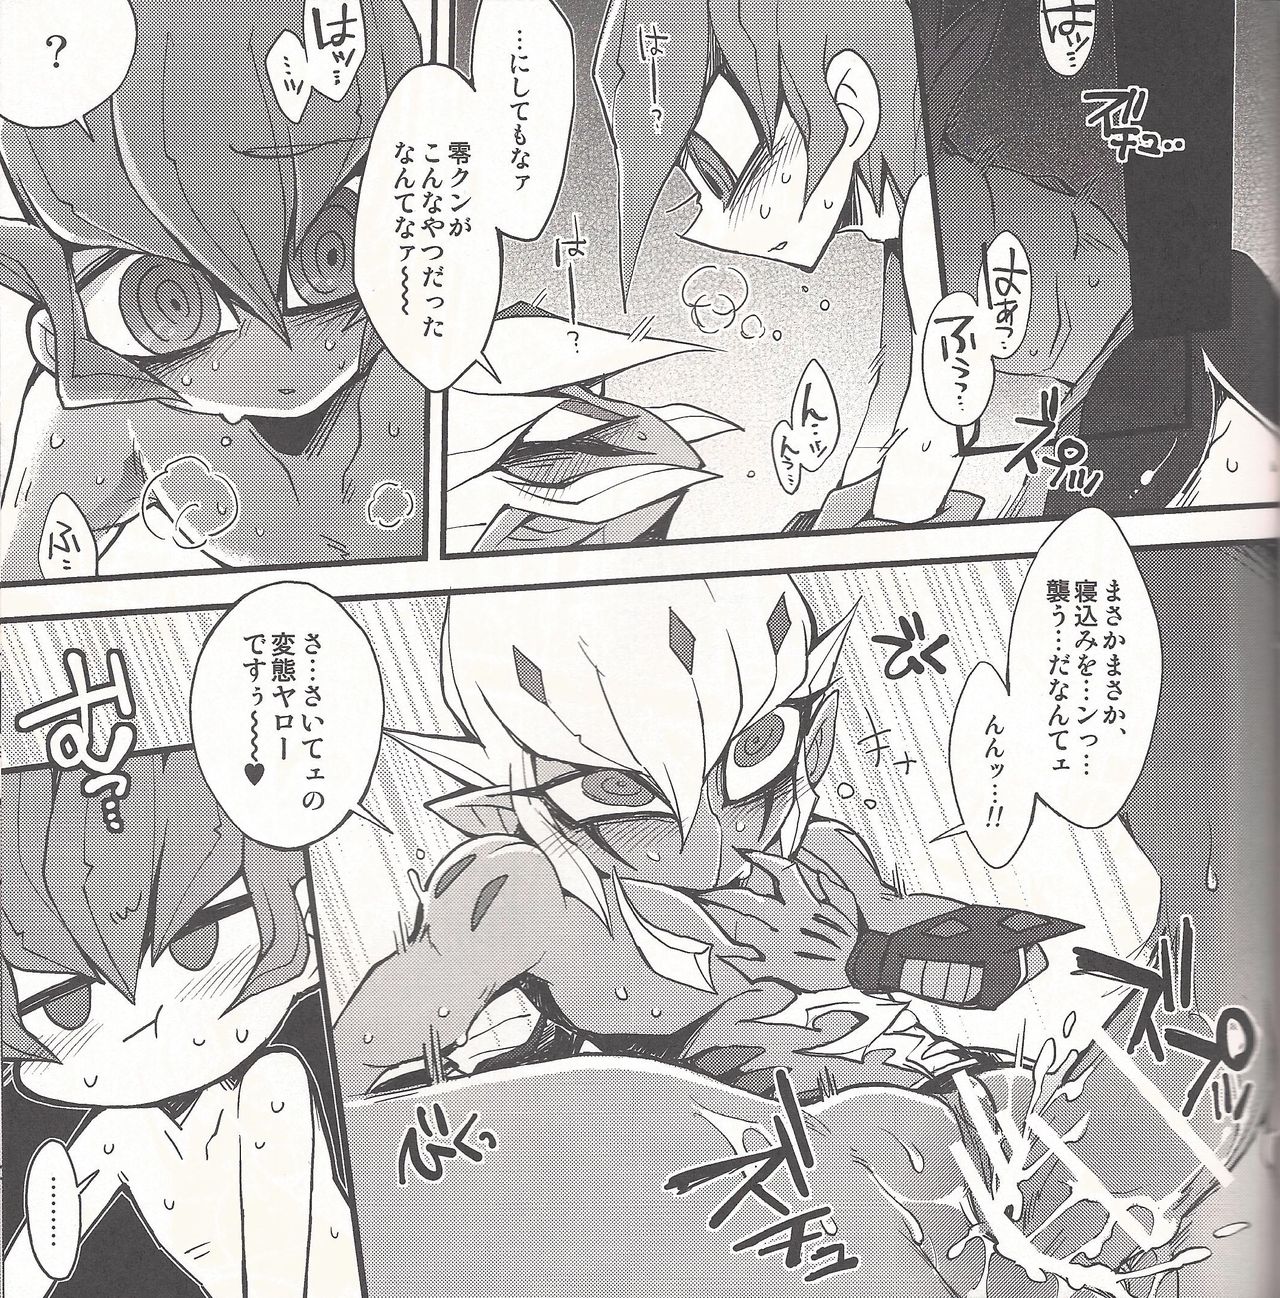 (DUEL PARTY2) [JINBOW (Chiyo, Hatch, Yosuke)] Pajama Party in the Starry Heaven (Yu-Gi-Oh! Zexal) page 50 full